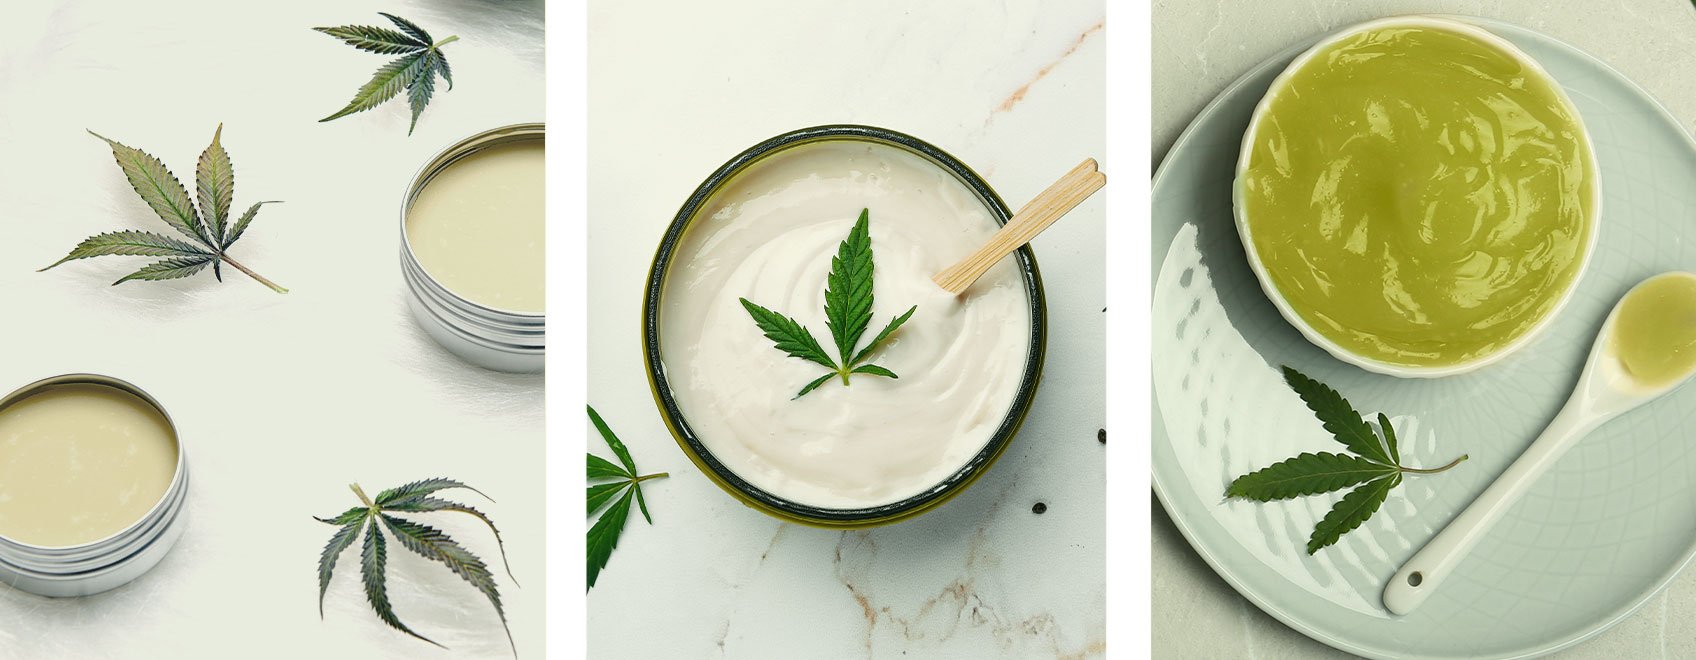 How Does Cannabis Salve Differ From Lotions and Creams?